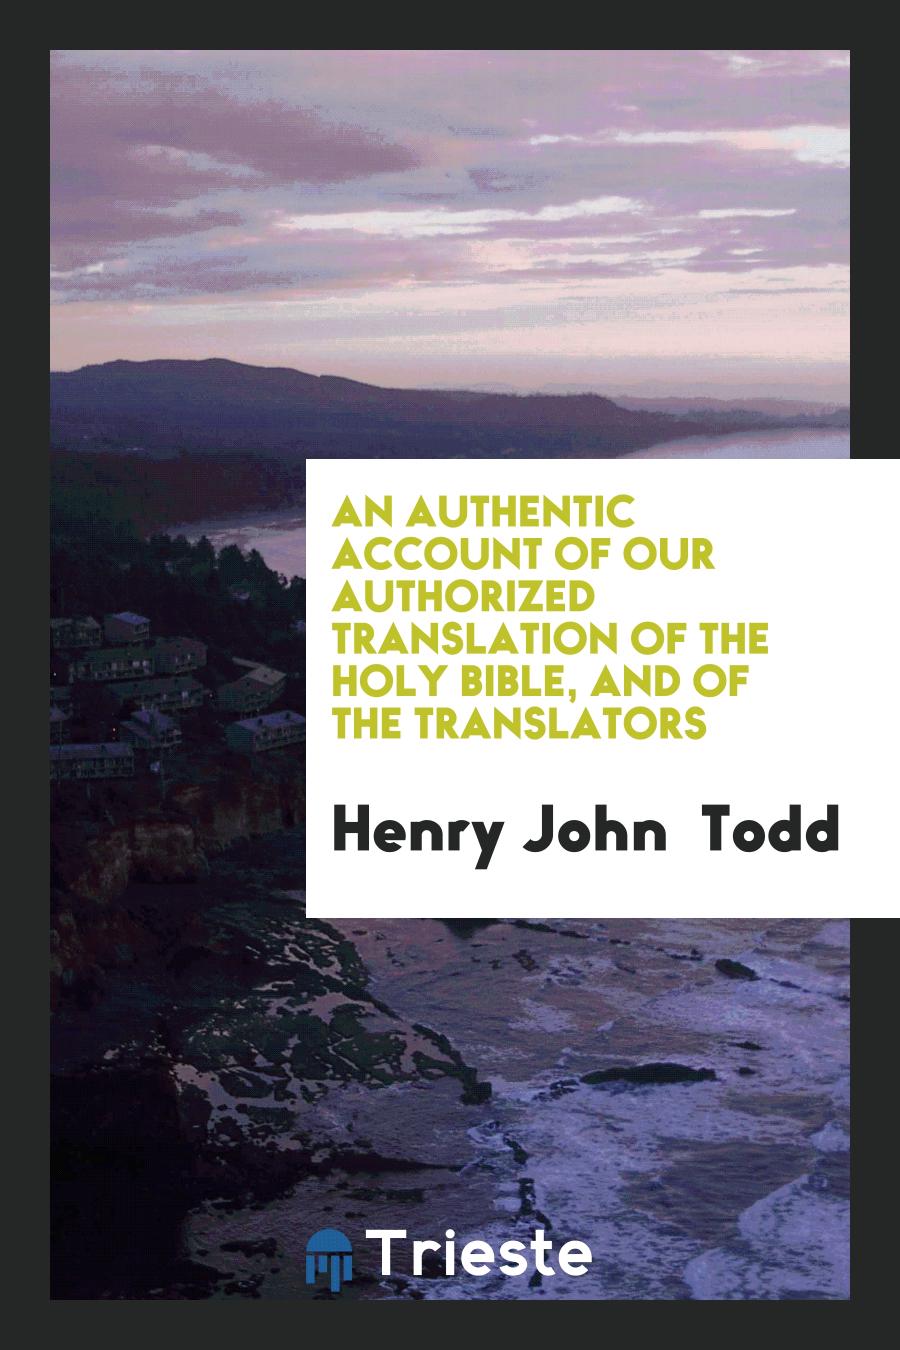 An authentic account of our authorized translation of the Holy Bible, and of the translators